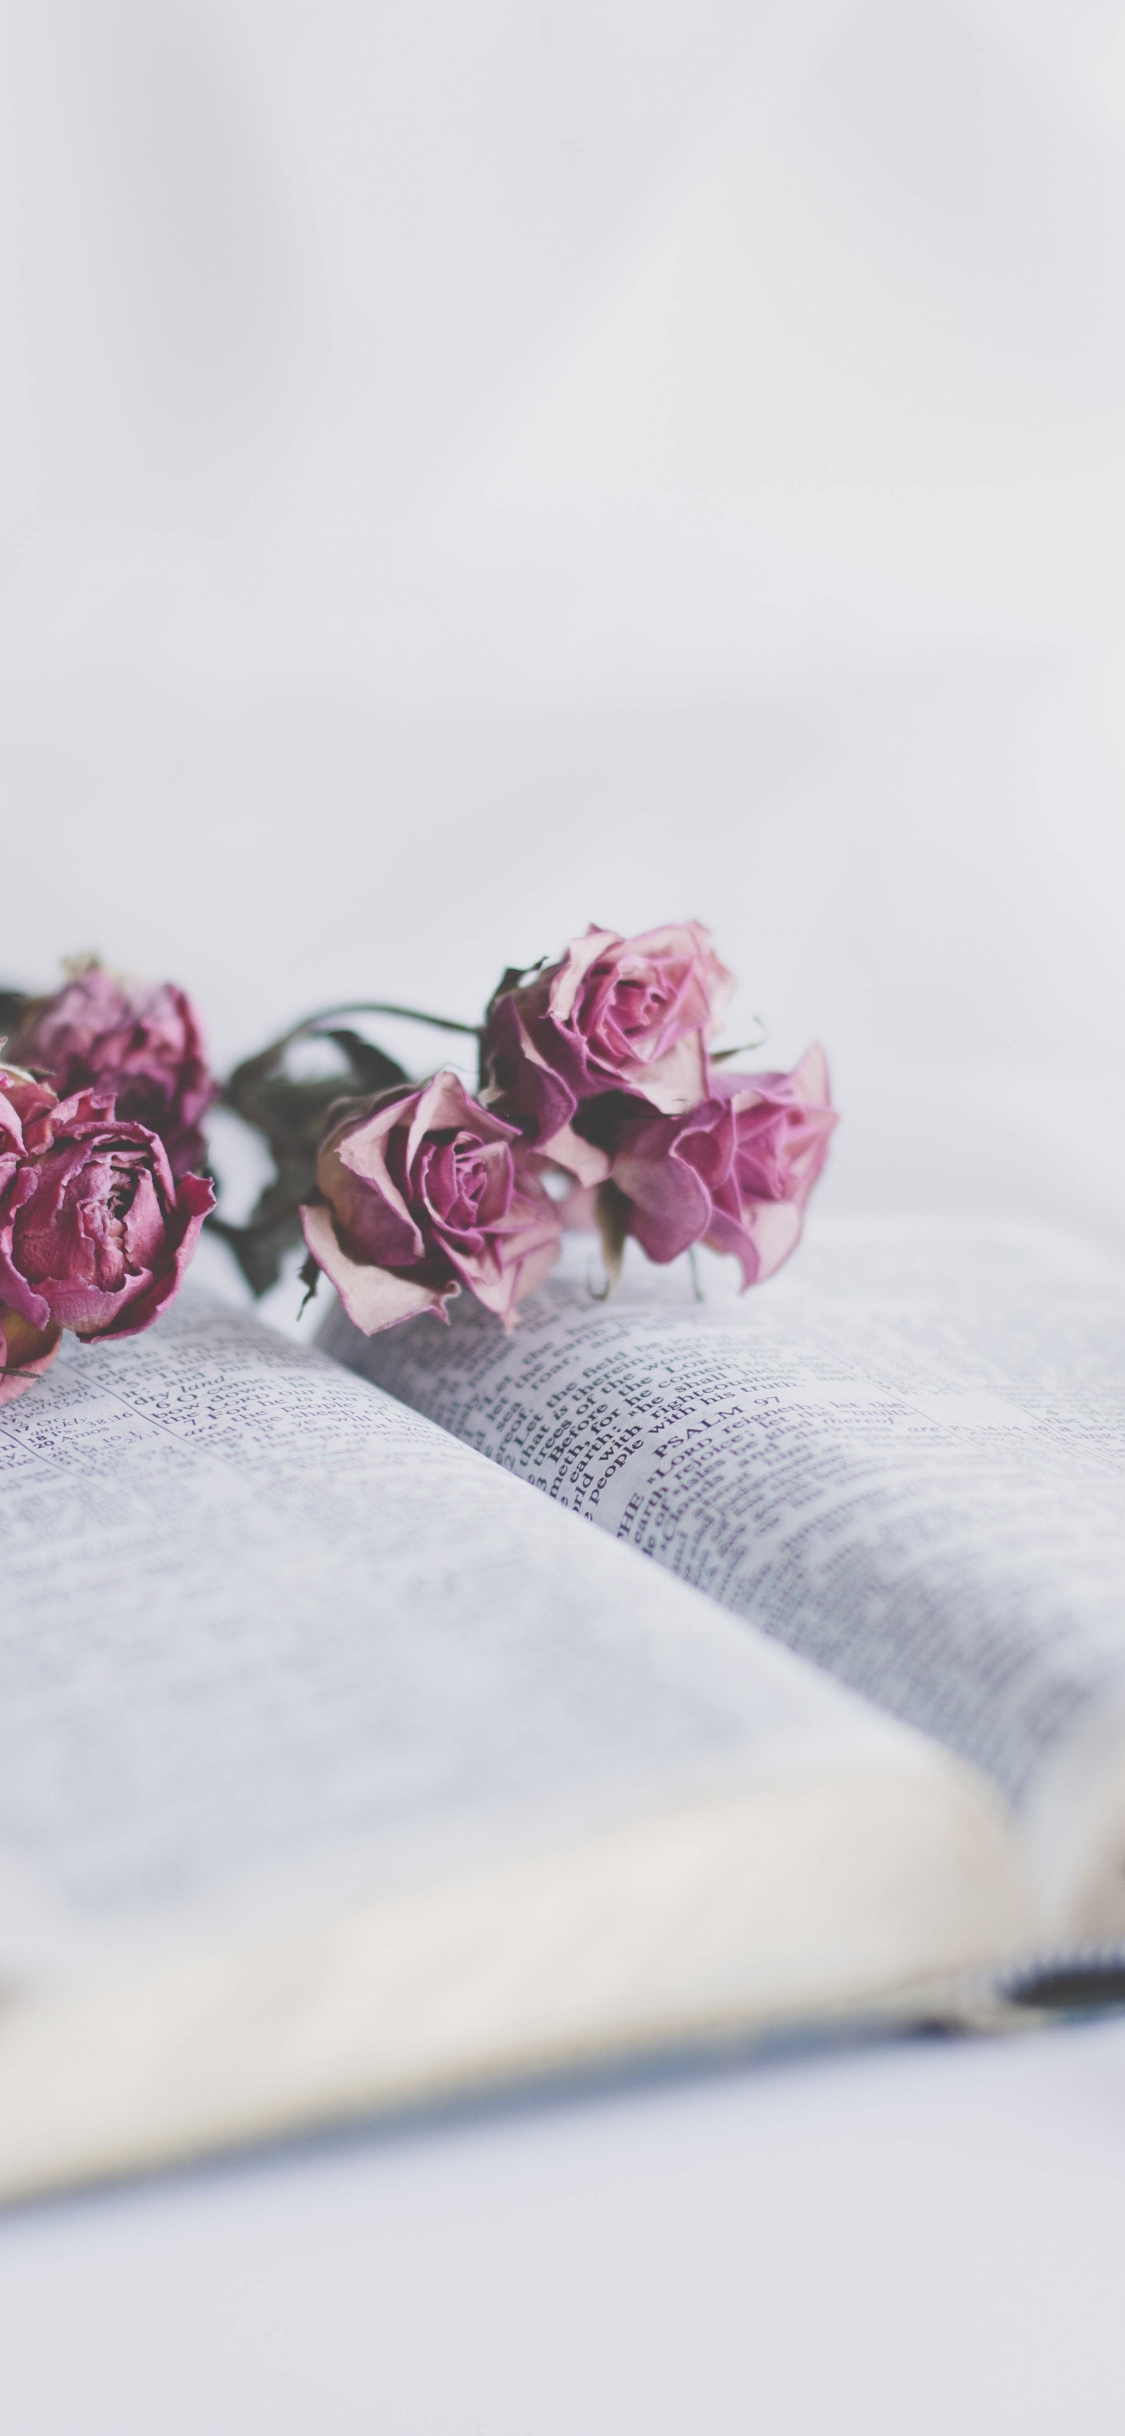 Book And Roses Flowers Wallpaper iPhone X